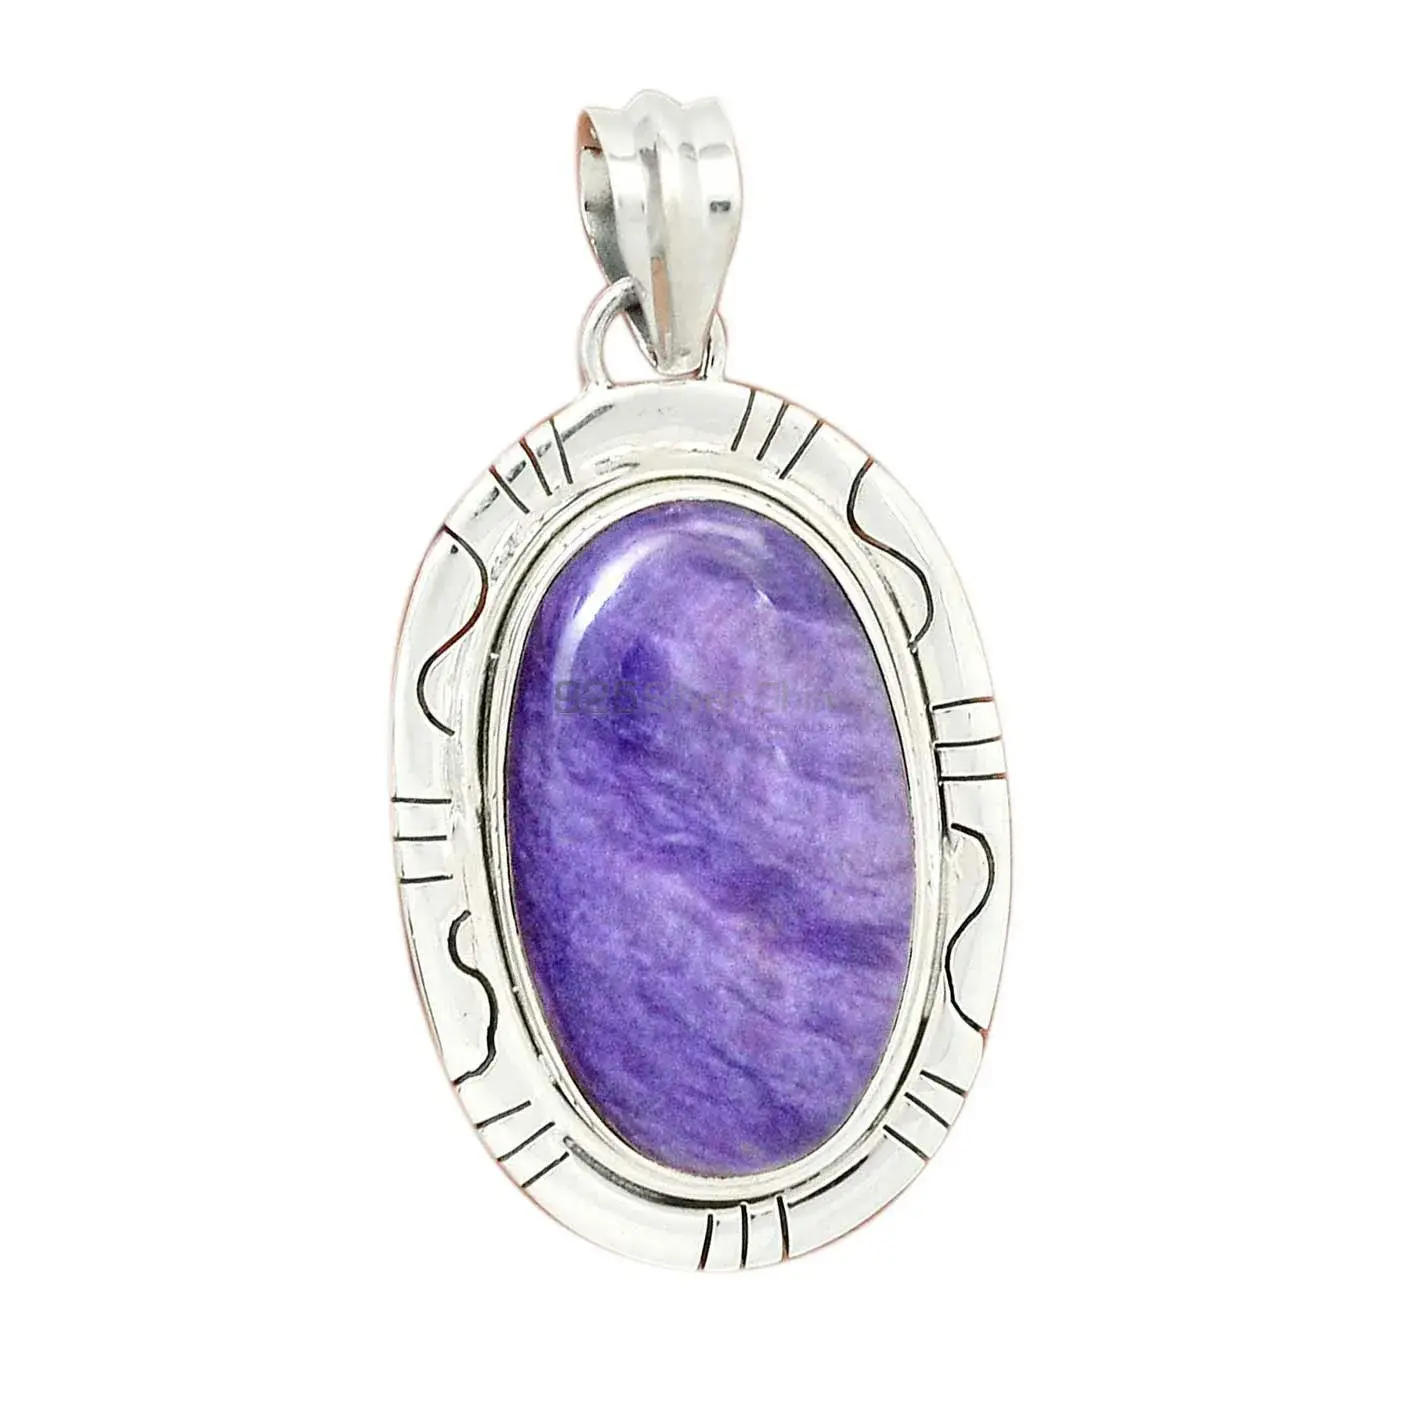 Top Quality Charoite Gemstone Pendants Wholesaler In Fine Sterling Silver Jewelry 925SP40-1_1